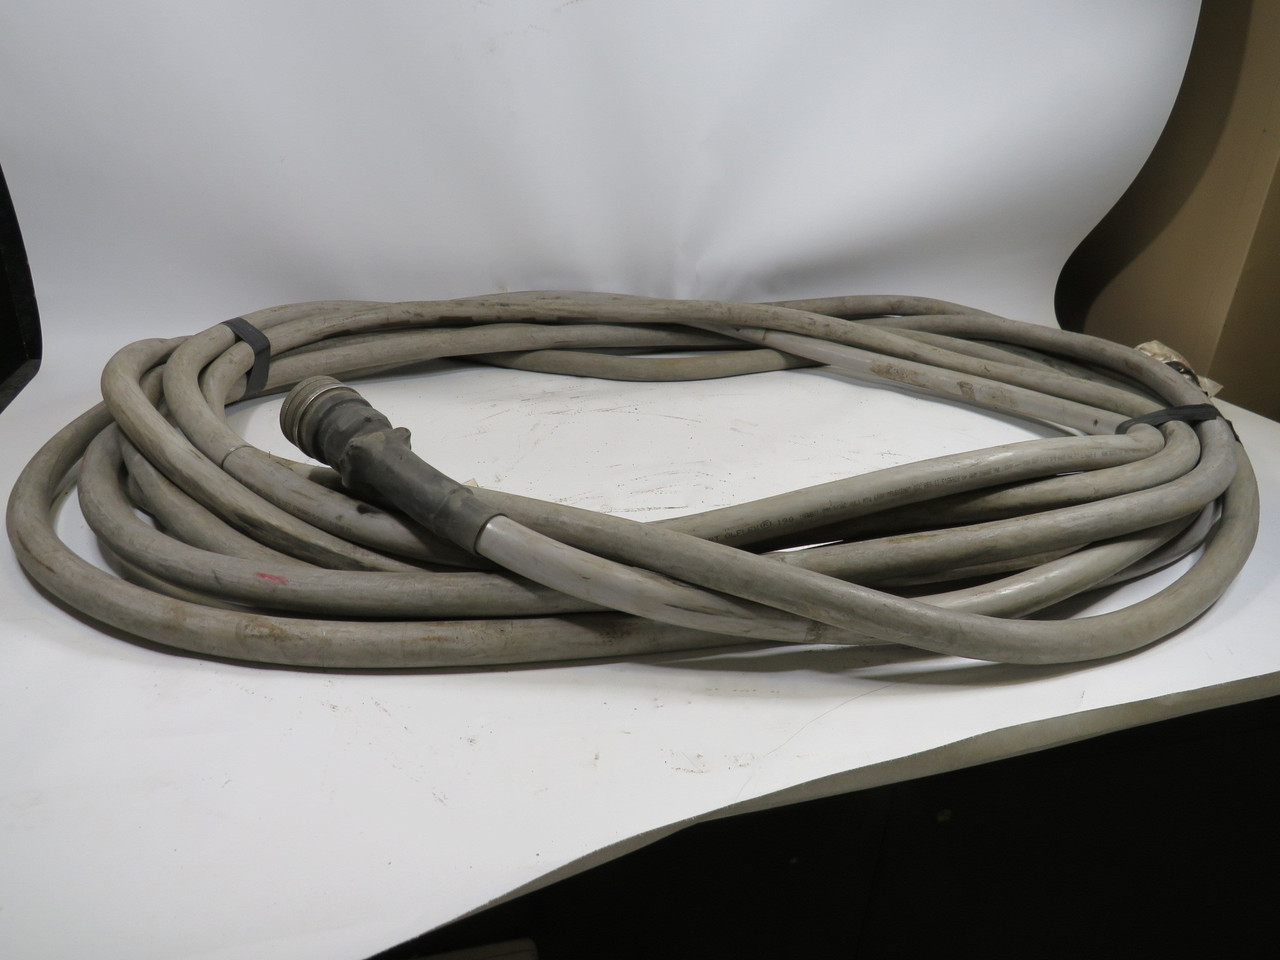 Boart Longyear 3548594 Hose/Cable Assembly 17.5m USED